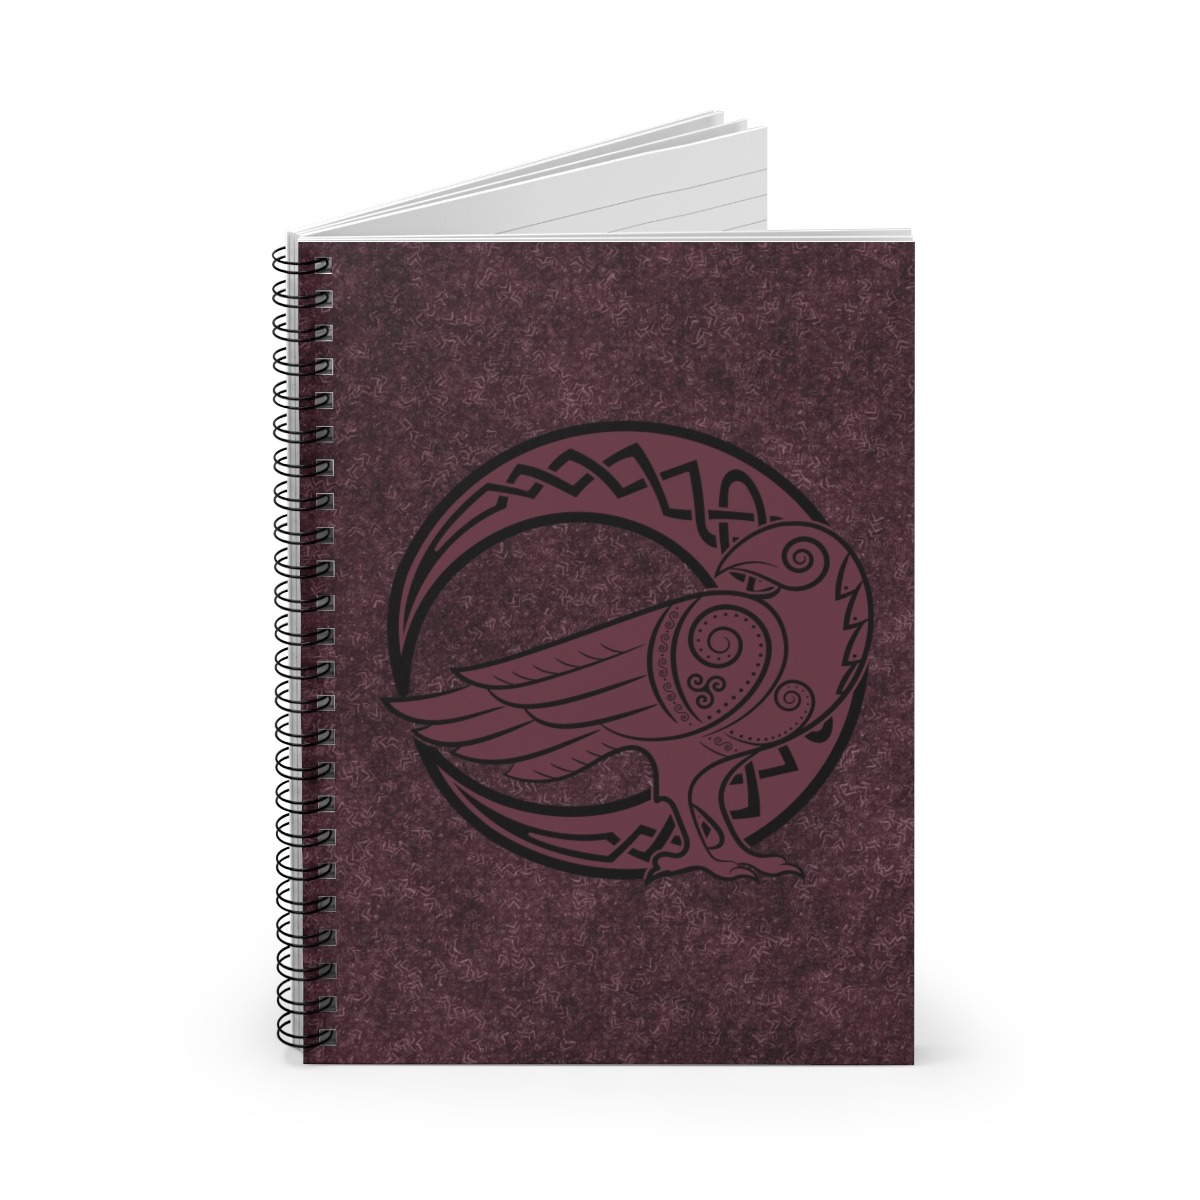 Maroon Raven Crescent Moon Ruled Line Spiral Notebook